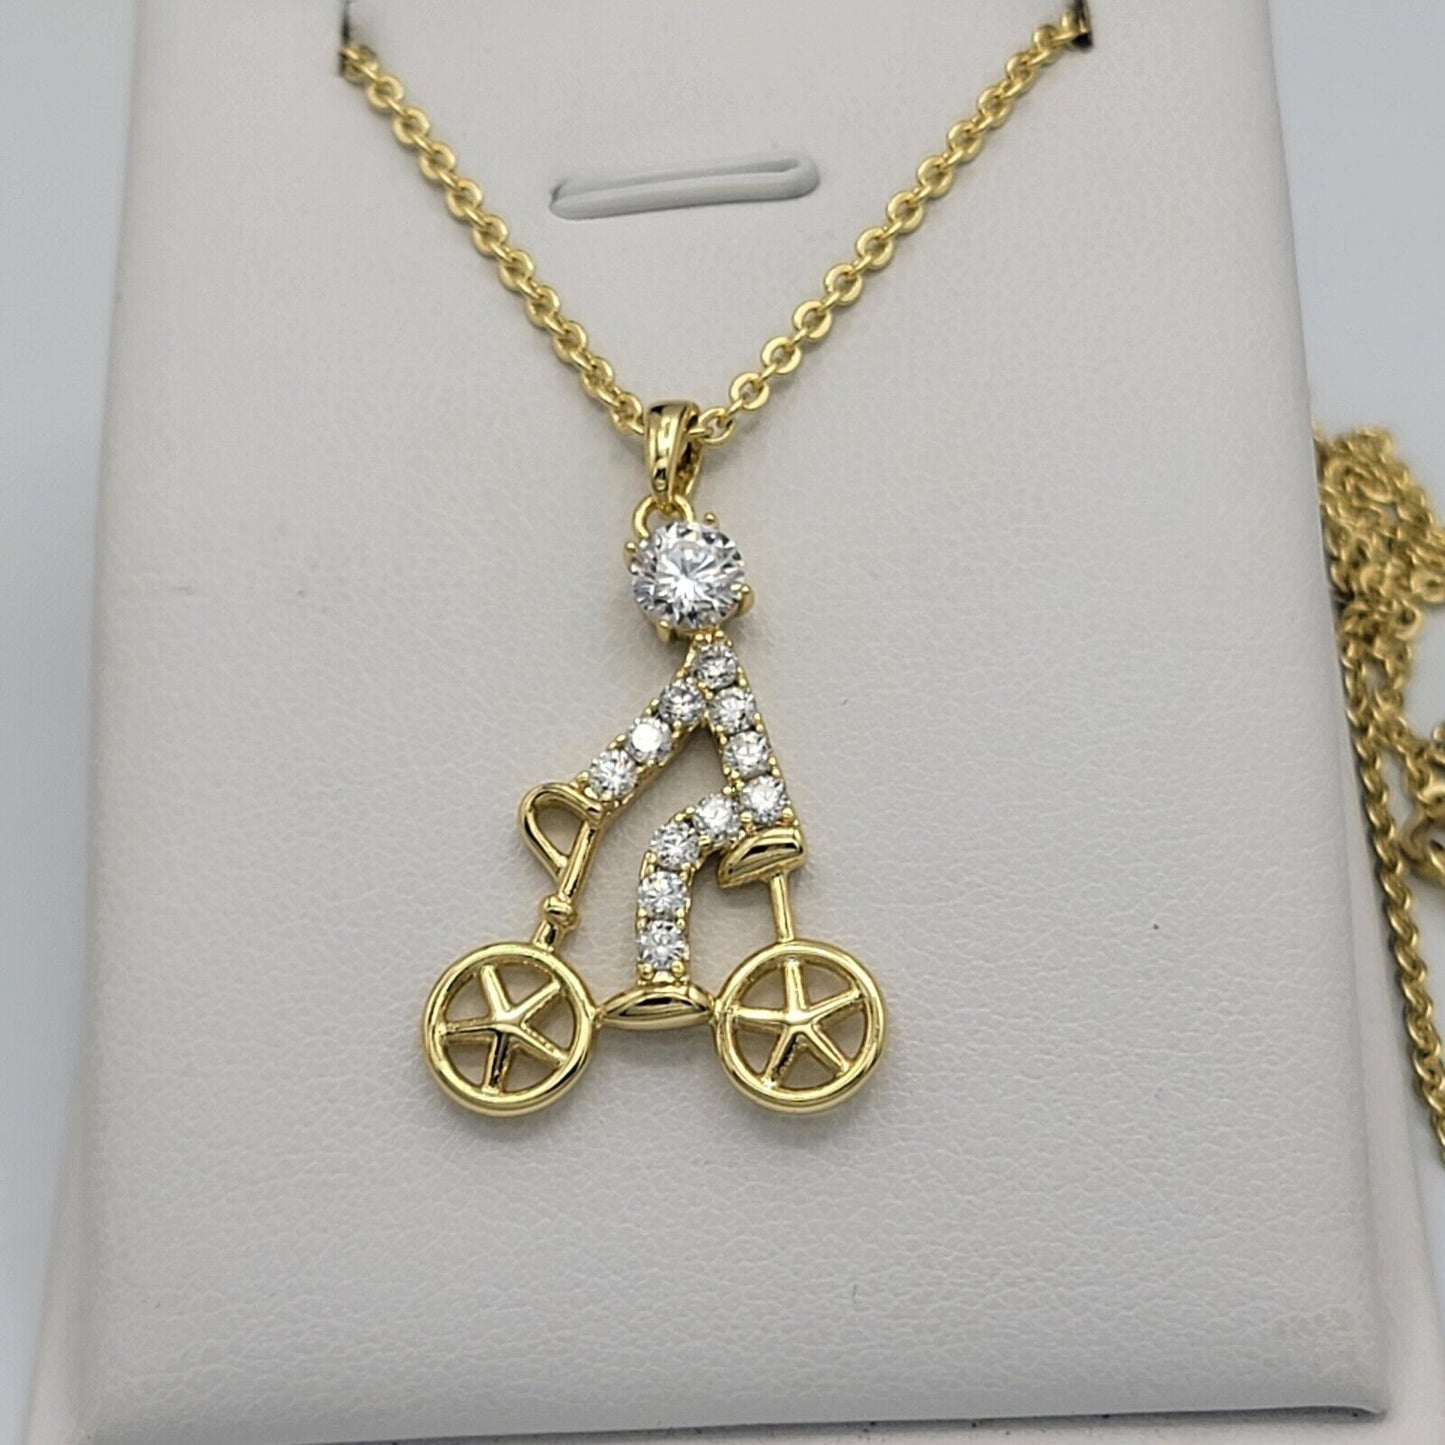 Necklaces - 14K Gold Plated. Clear Crystals Bicycle Bike Pendant & Chain.